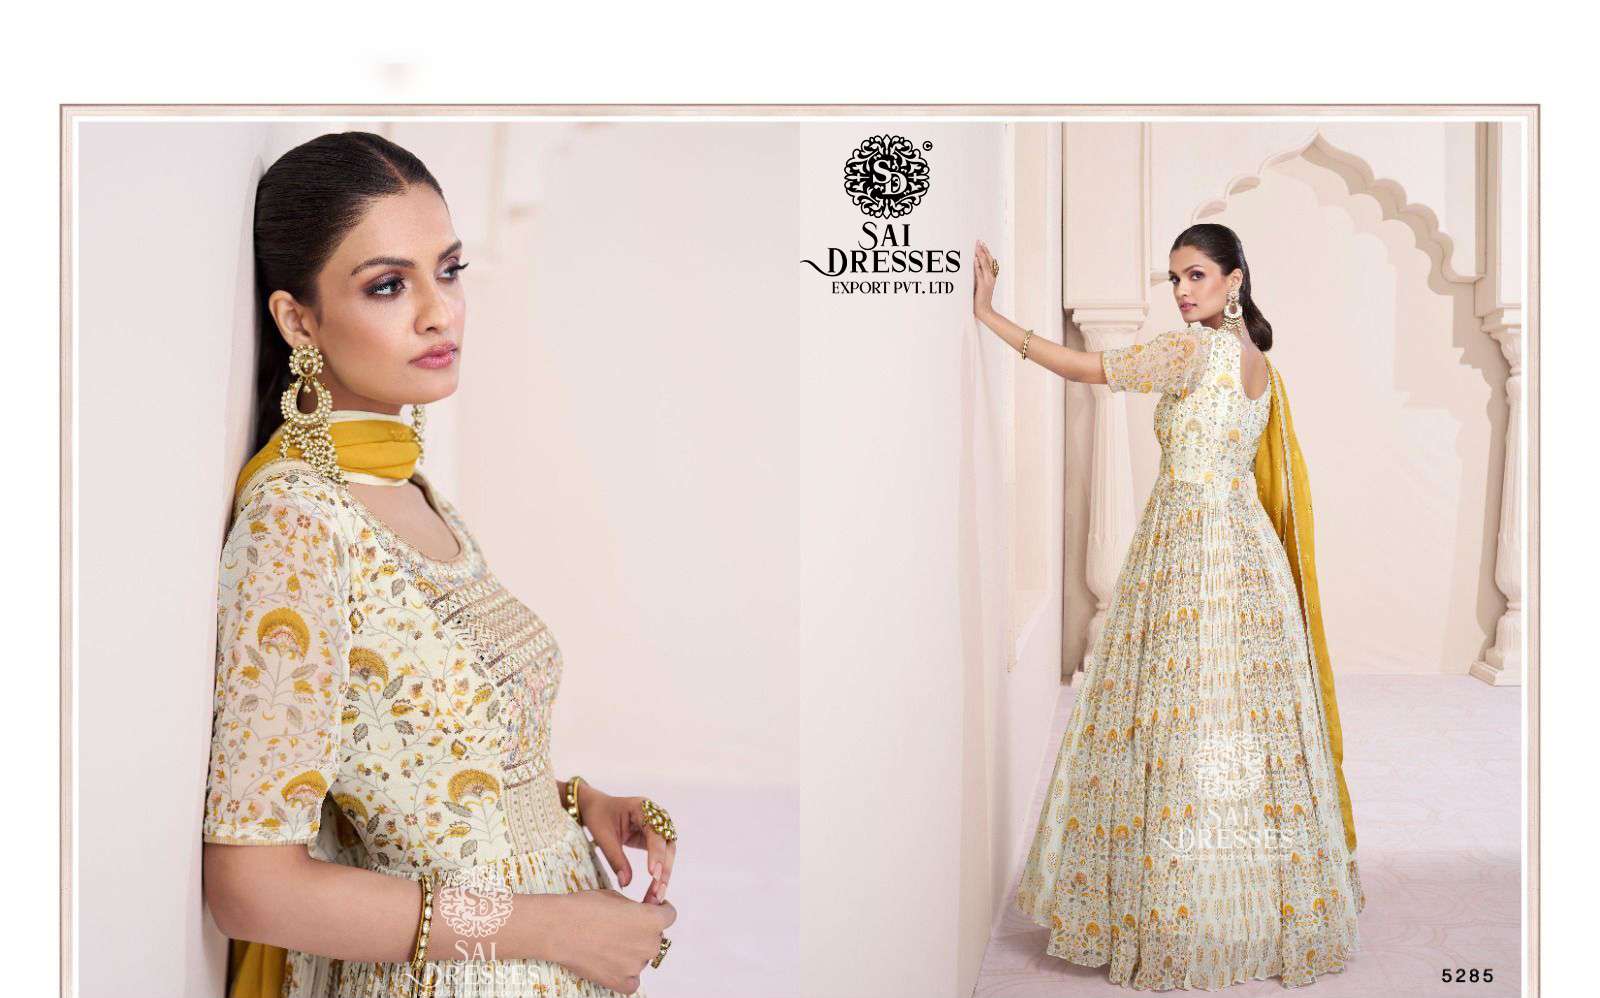 SAI DRESSES PRESENT VARTIKA READYMADE CLASSY WEAR DESIGNER LONG GOWN WITH DUPATTA IN WHOLESALE RATE IN SURAT